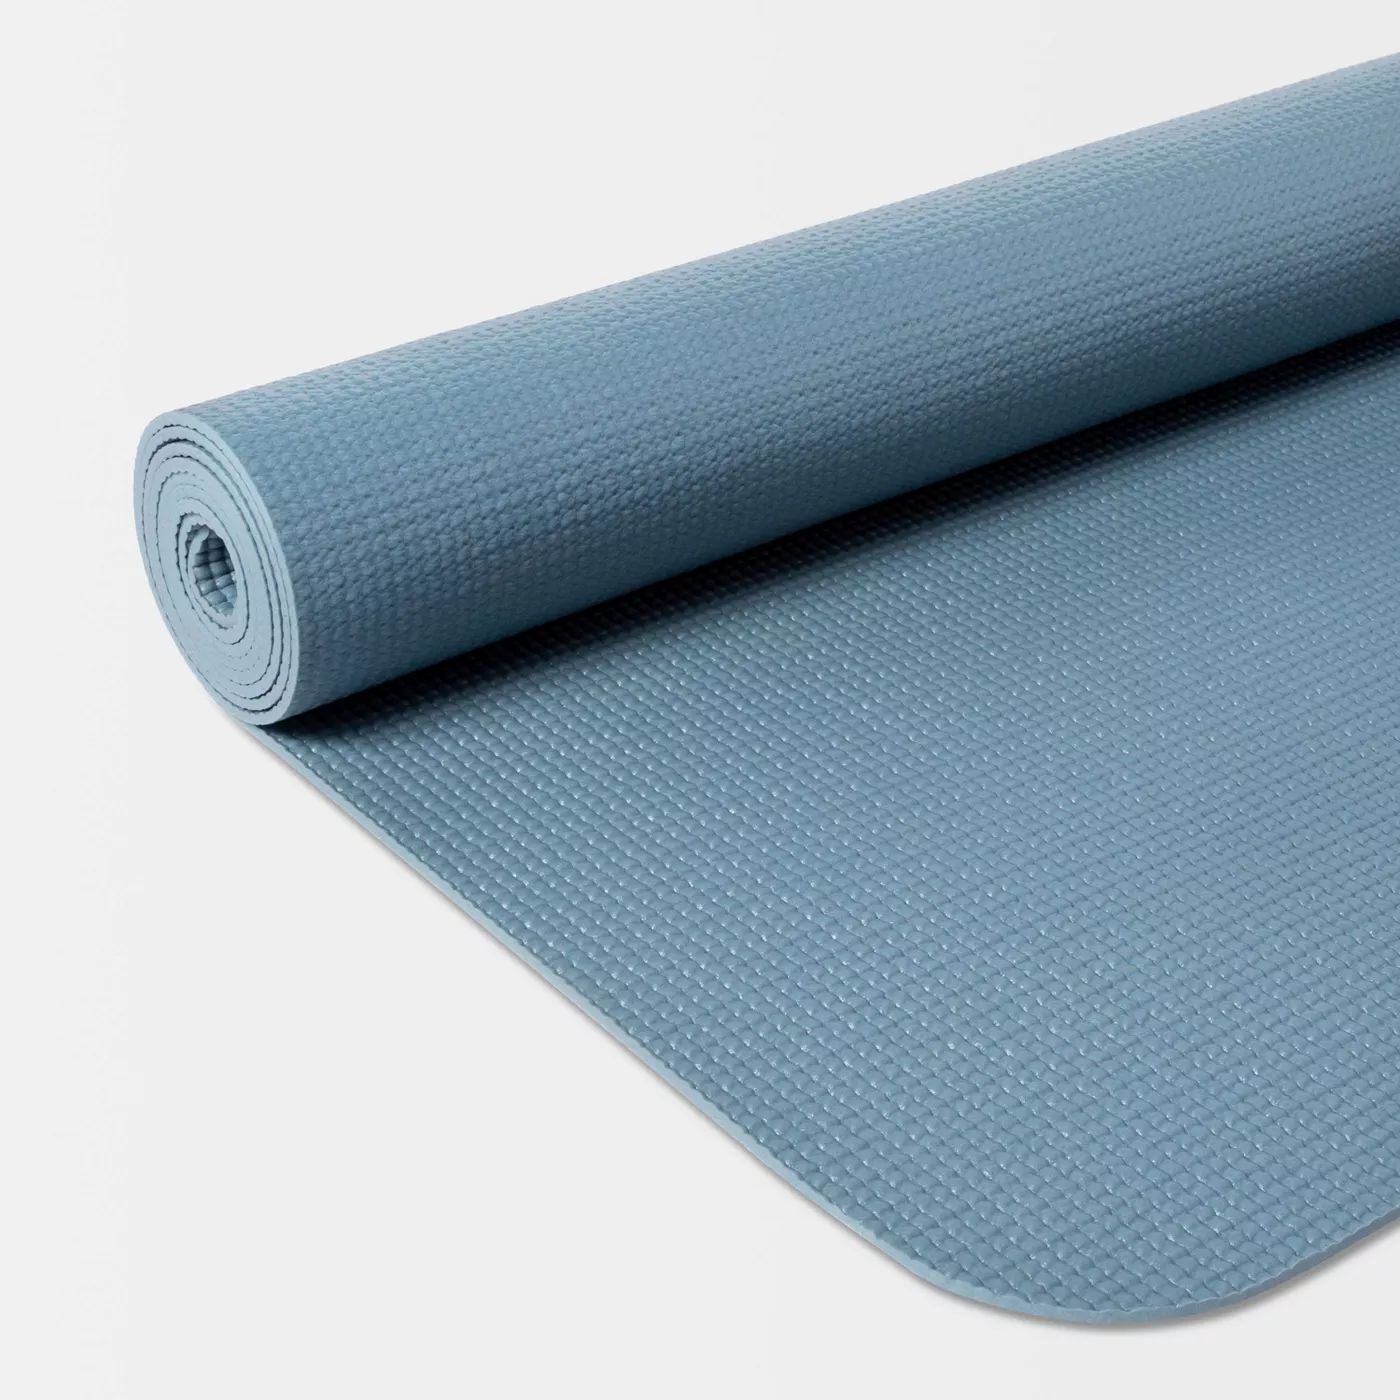 A blue yoga mat partially unrolled